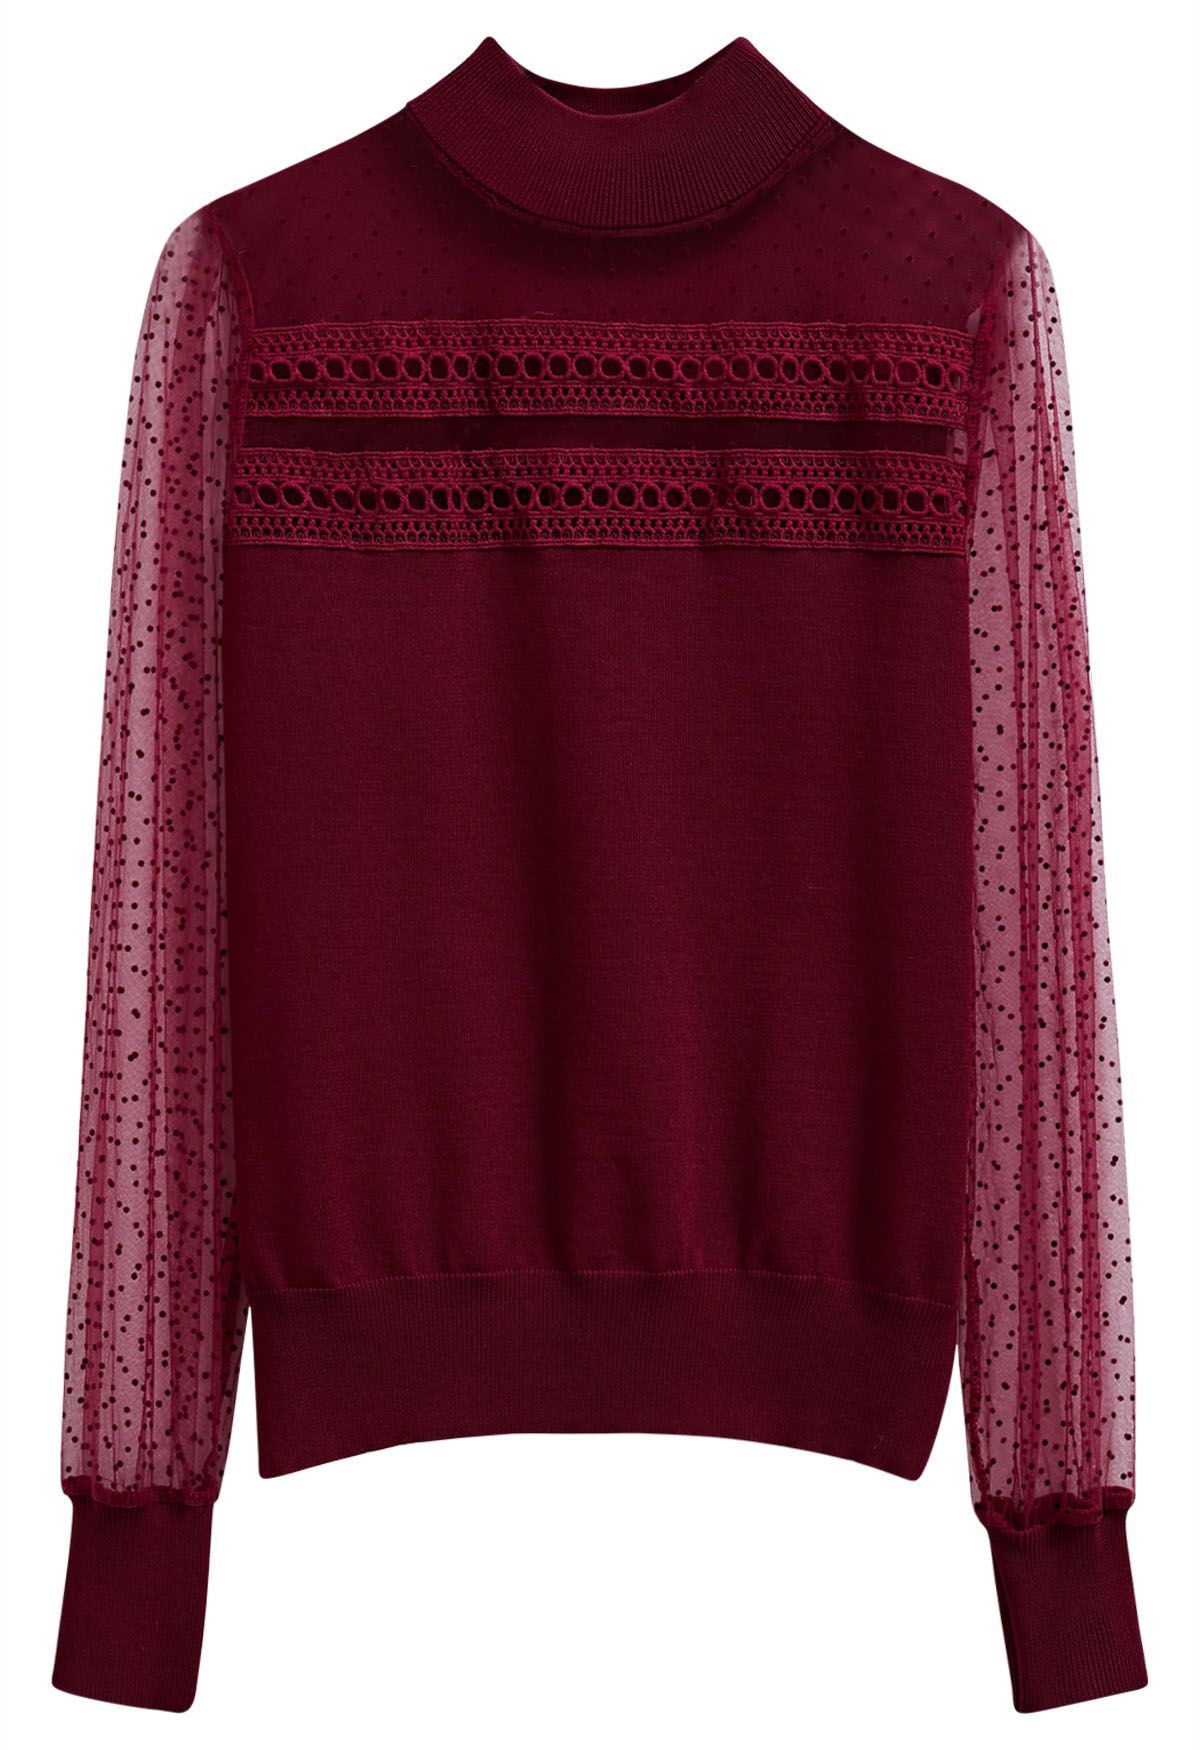 Flock Dots Mesh Spliced Knit Top in Burgundy | Chicwish